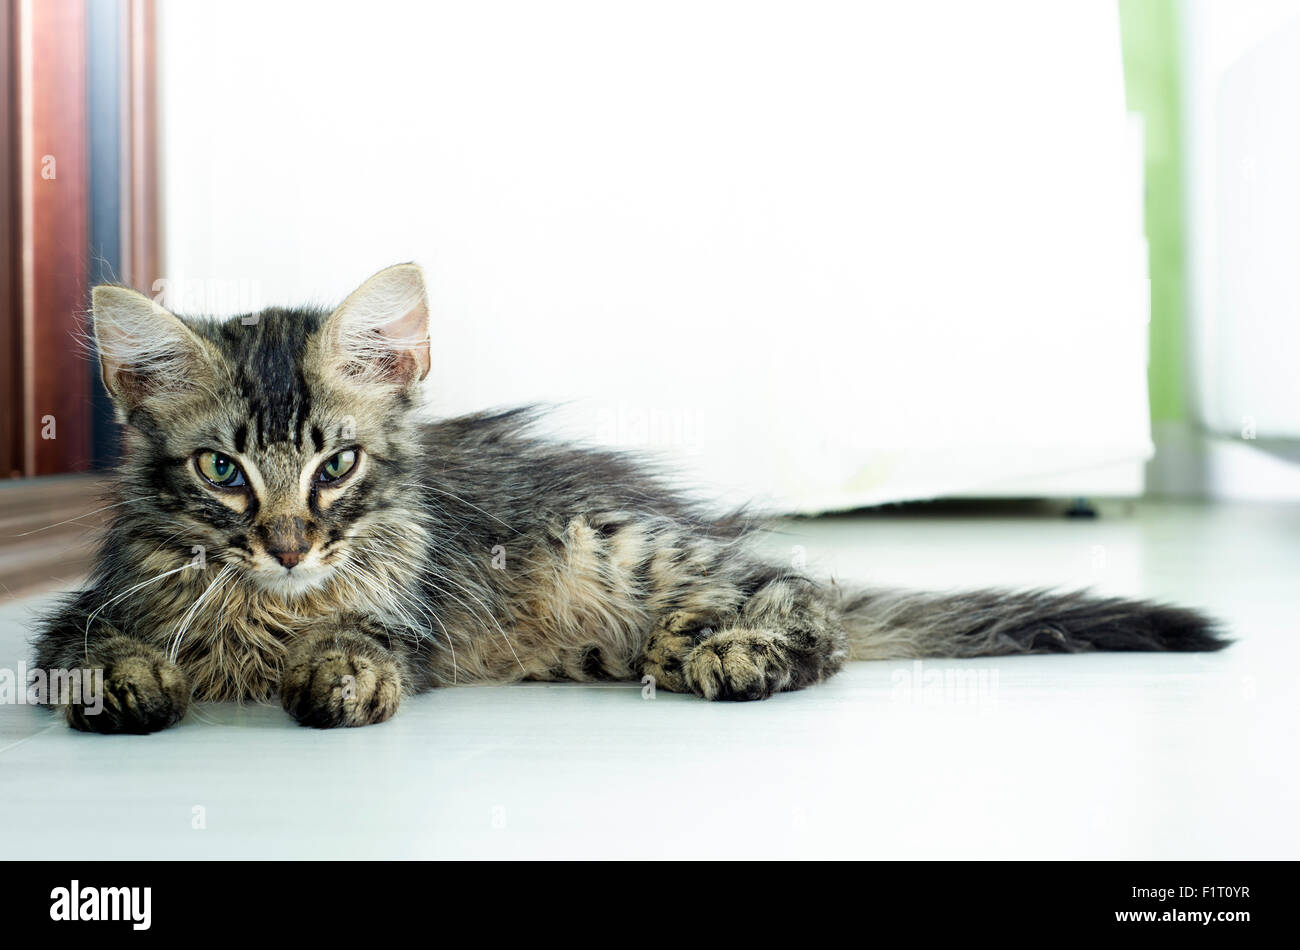 Portrait of a baby tabby cat lying on the floor indoor as beautiful animal Stock Photo